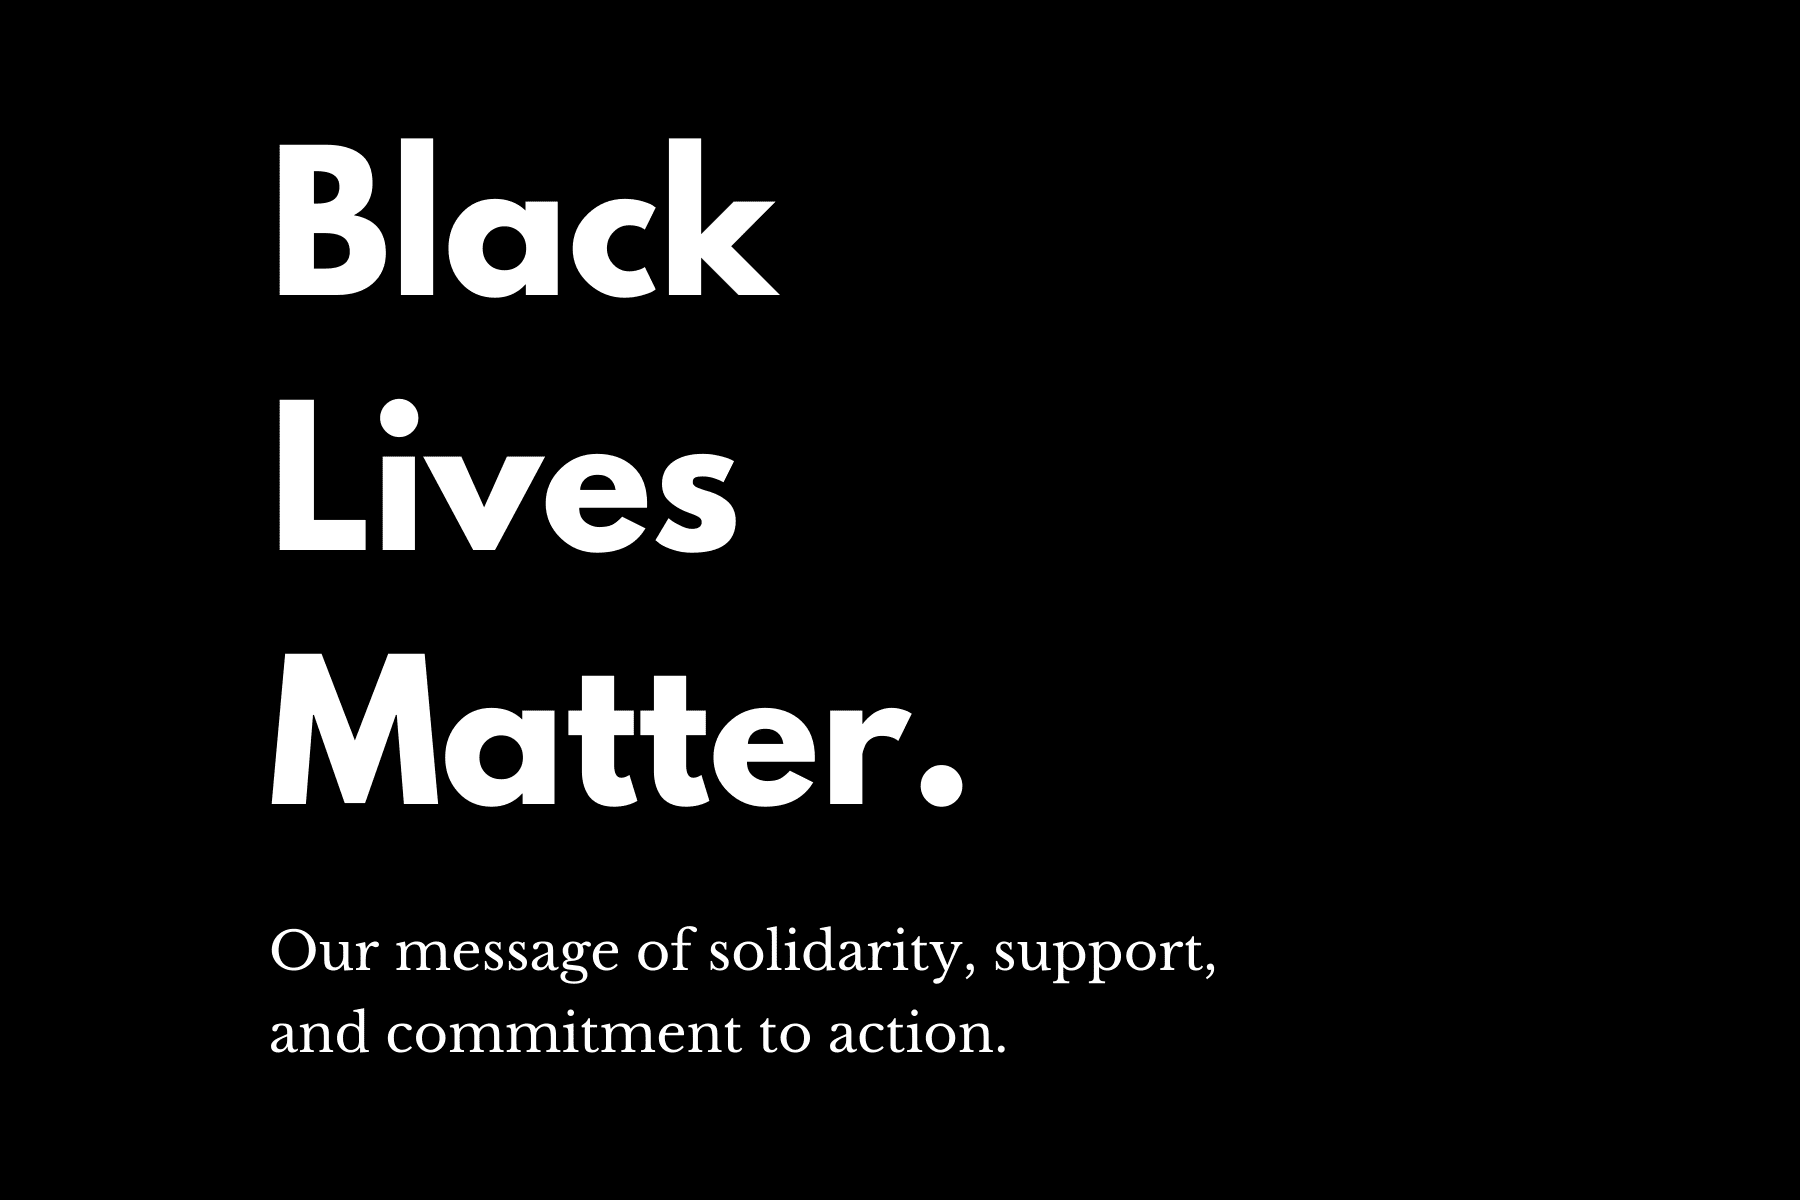 Black Lives Matter. Our message of solidarity, support, and commitment to action.